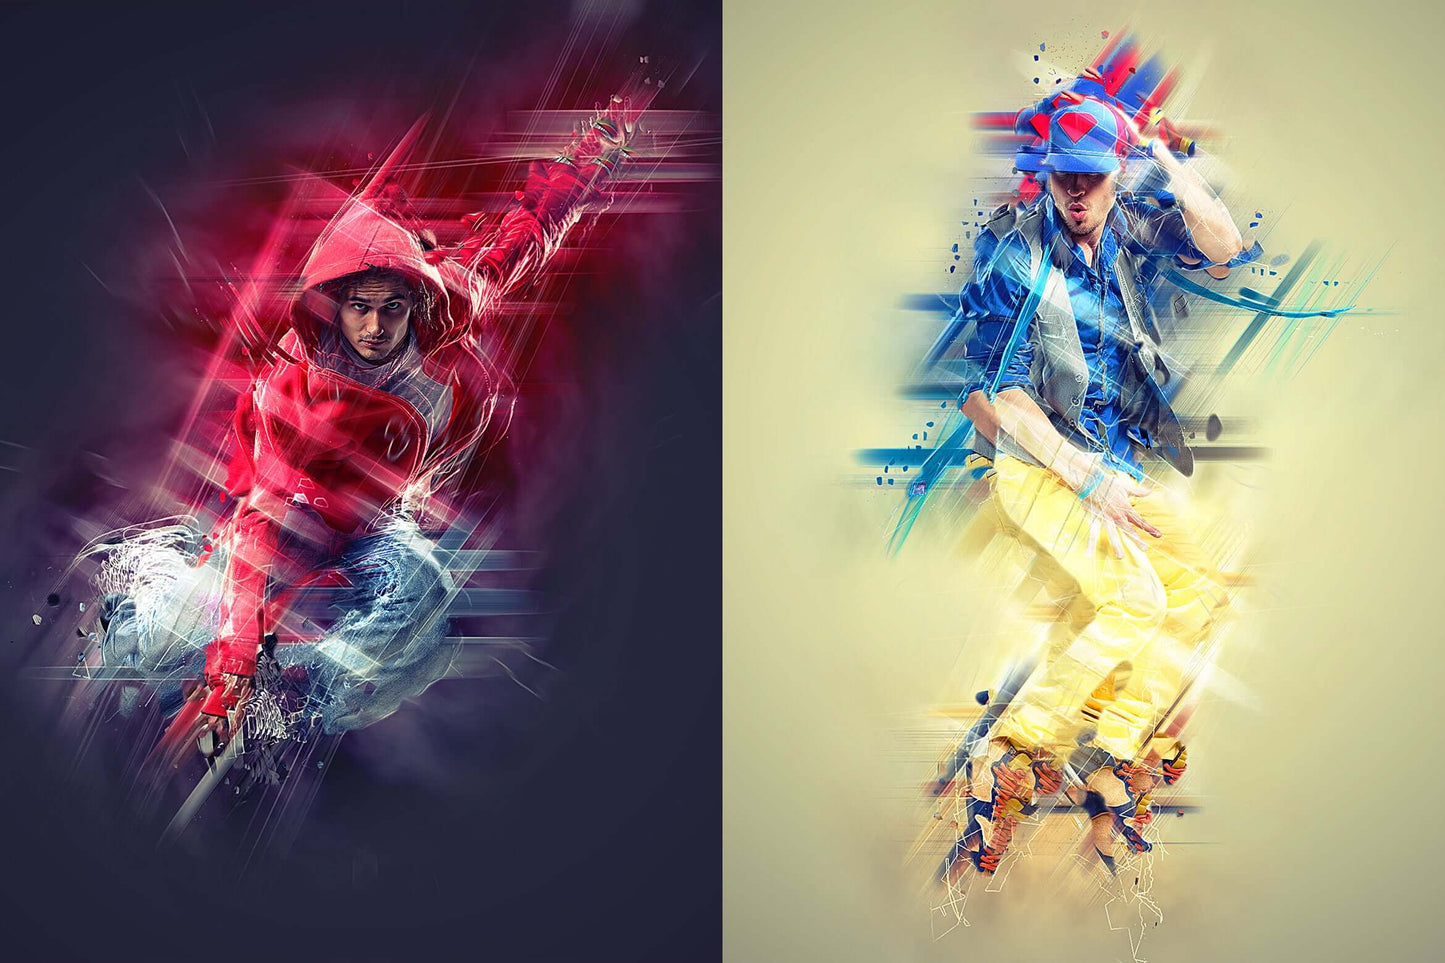 Abstract Photoshop Action